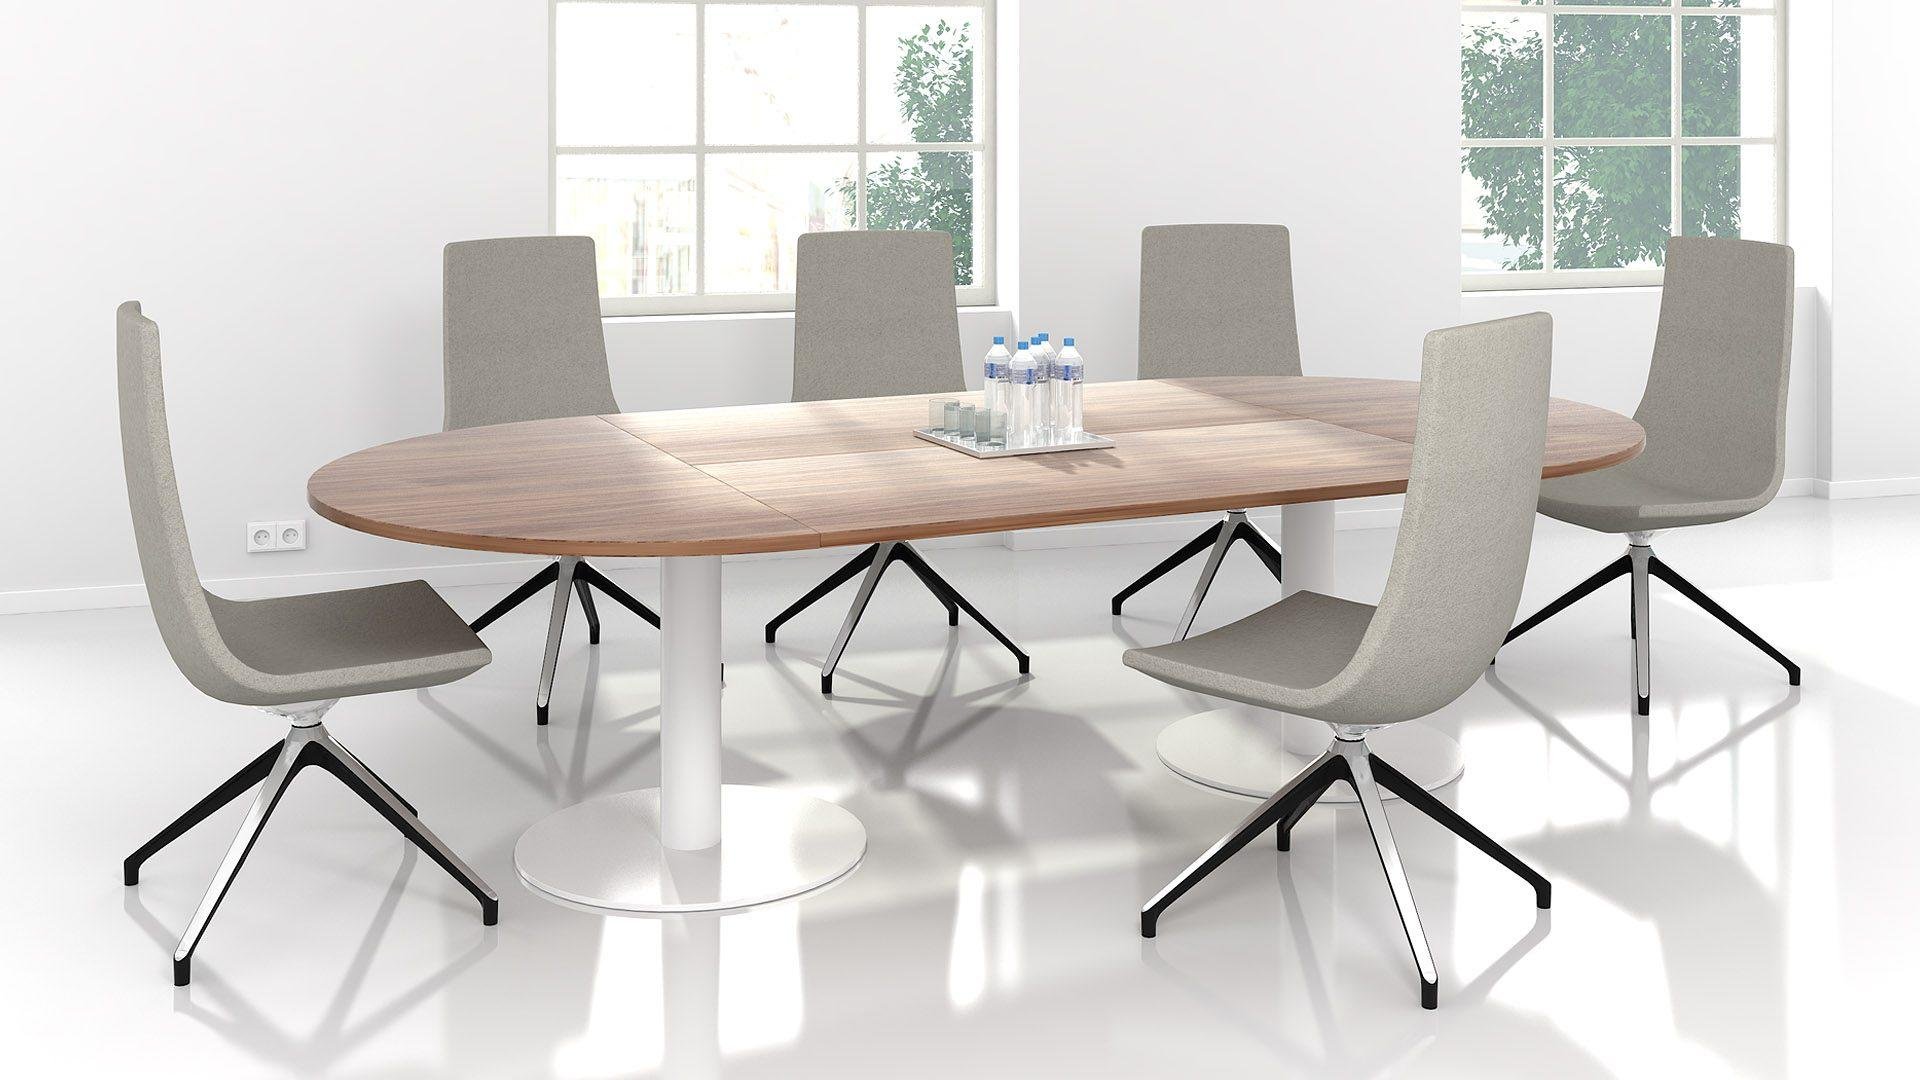 disc-conference-table-3.jpg